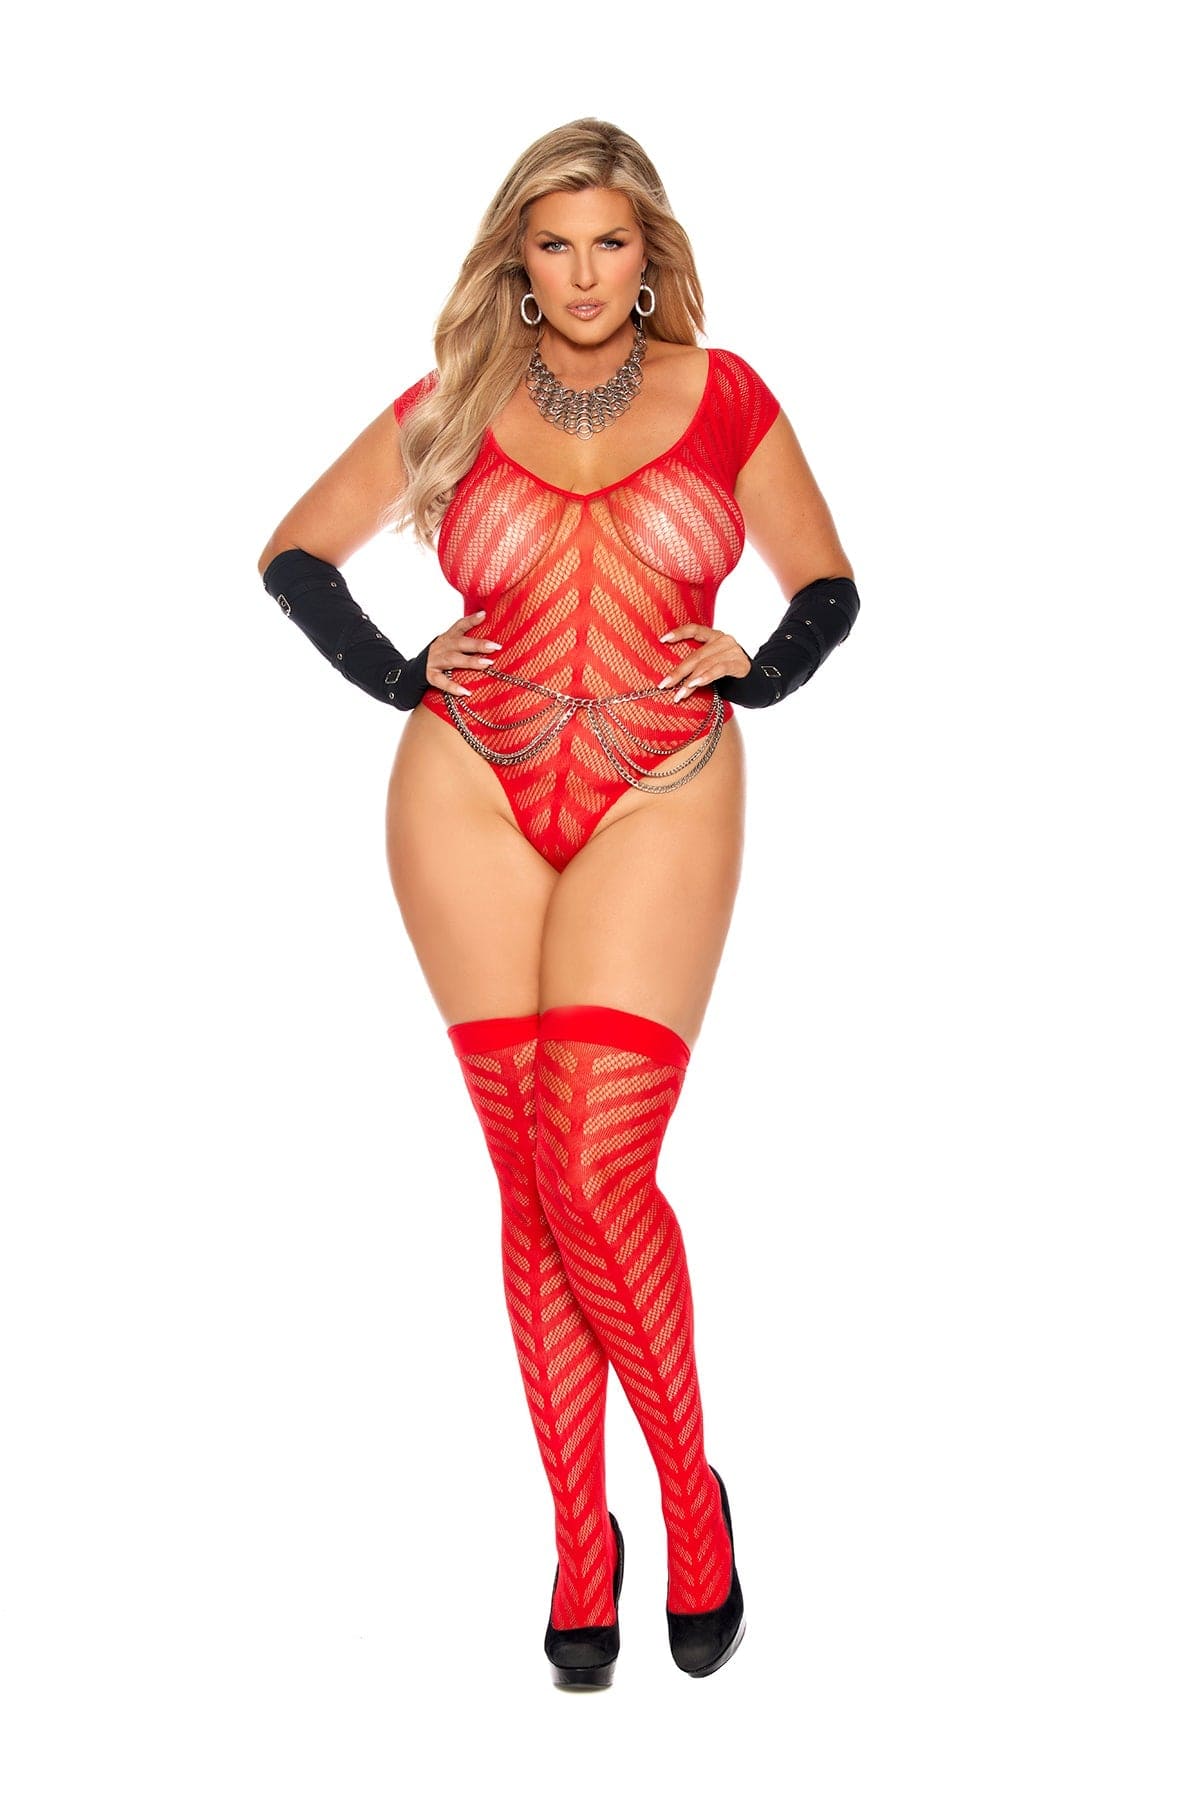 Plus Size Red Chevron Crochet Deep V Teddy and Matching Stockings Musotica.com